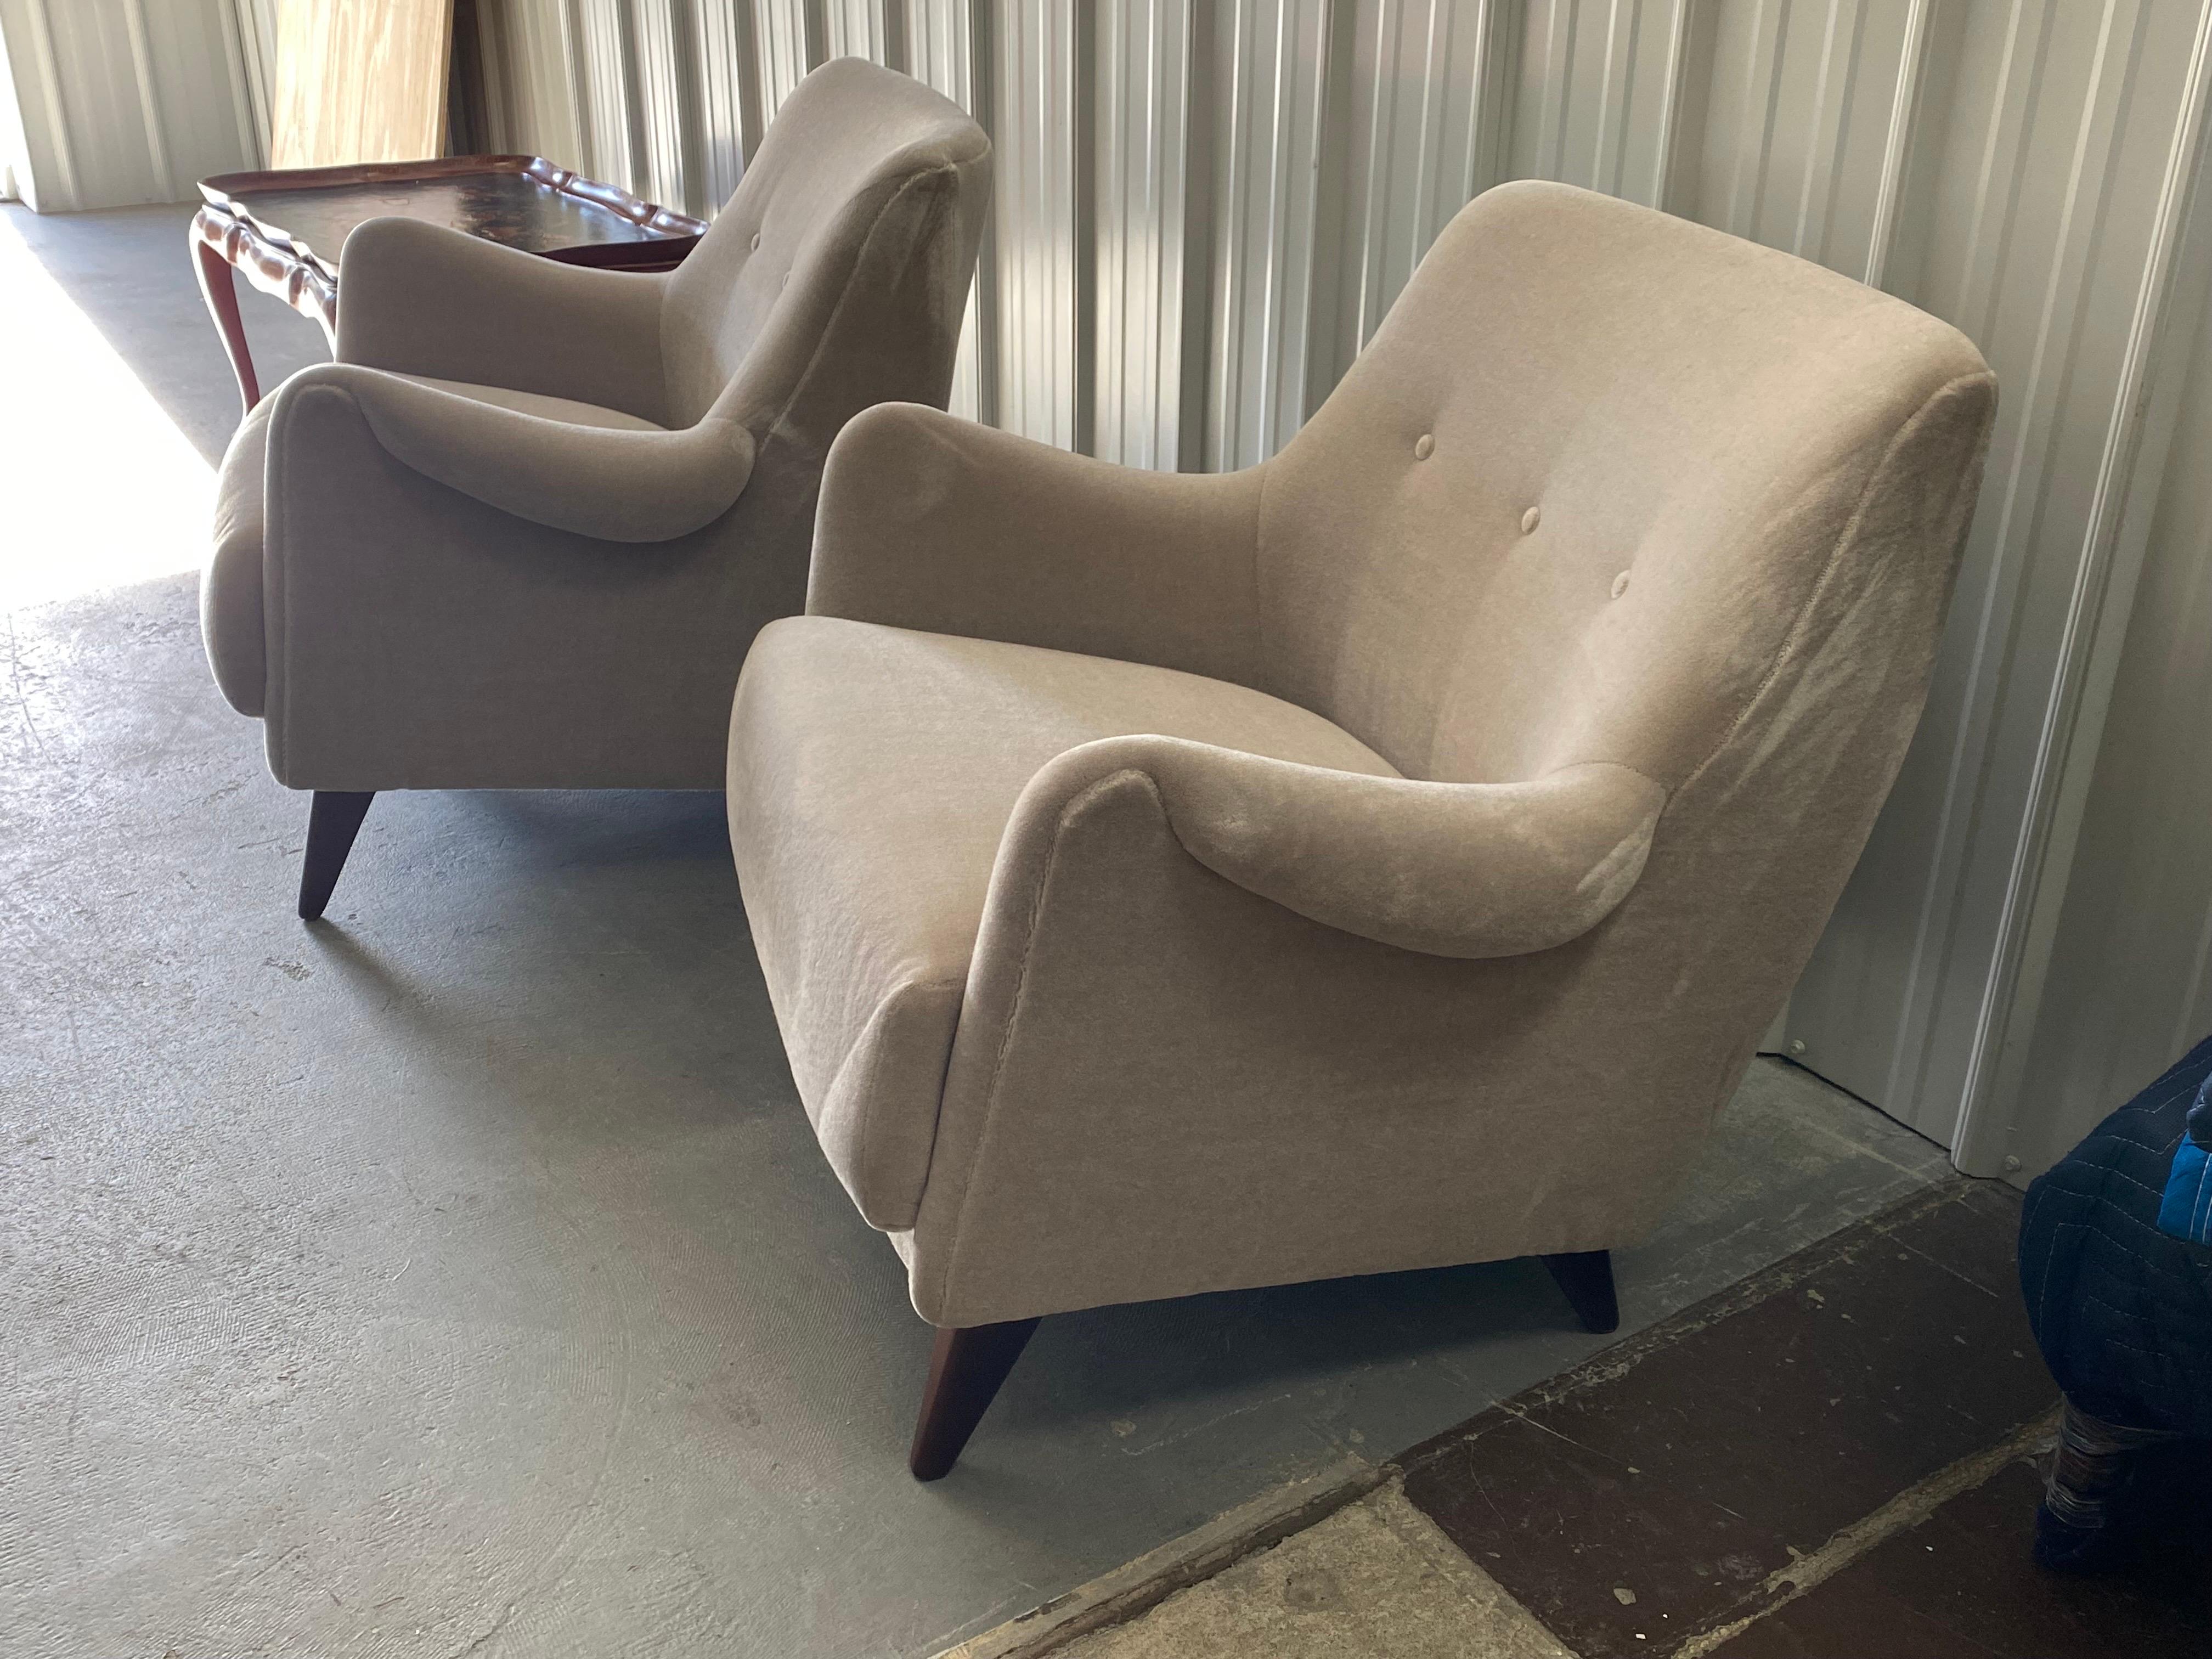 Pair of Italian Mid-Century Upholstered Mohair Armchairs.
A Ponti Augustus-esque stance but the arm is more Carl Malmsten. Designer unknown but these have all the right elements of a classic Mid-Century lounge chair. Thought to be of Italian origin.